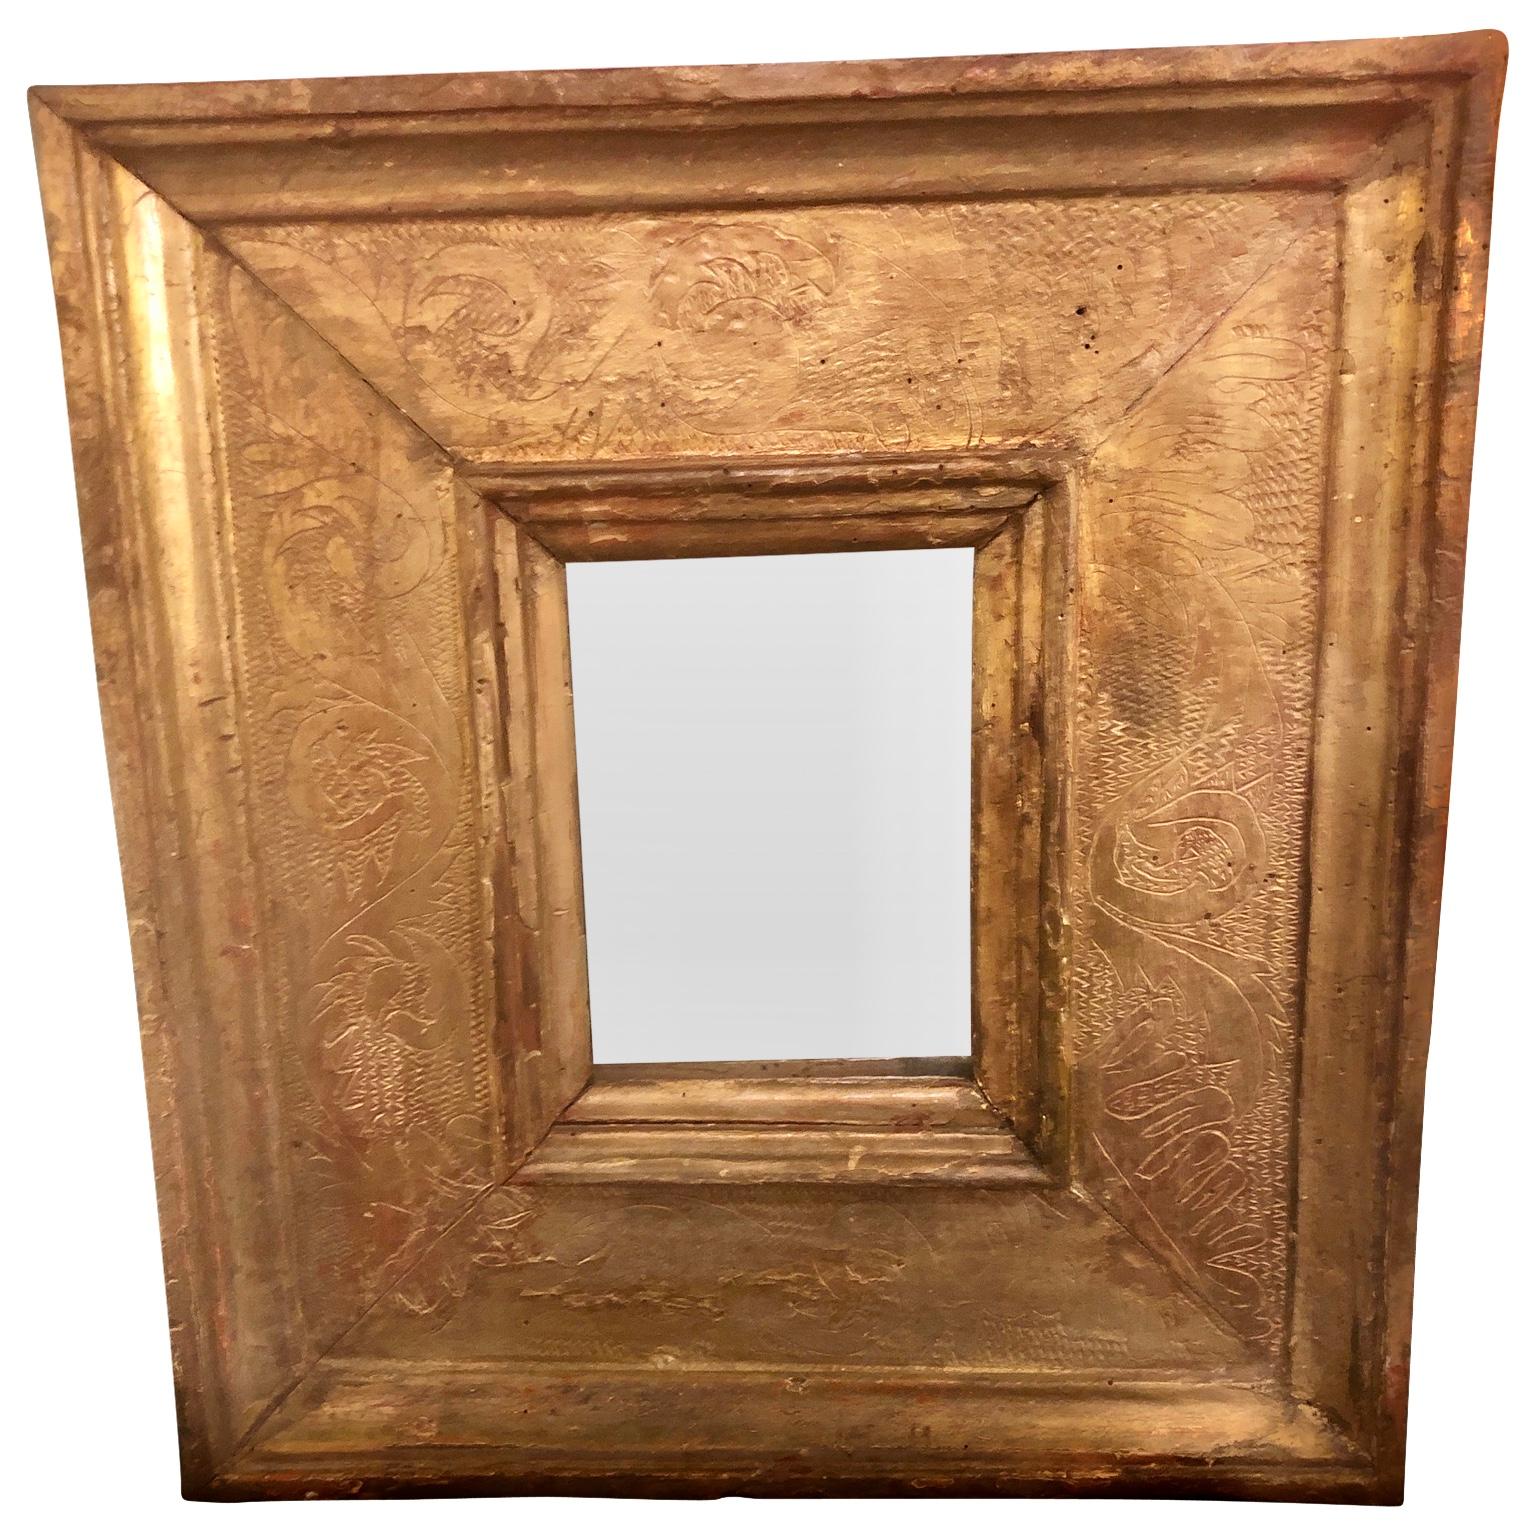 Early gilded Venetian wall mirror, circa 1780.
A gorgeous pop of gold for your living space.